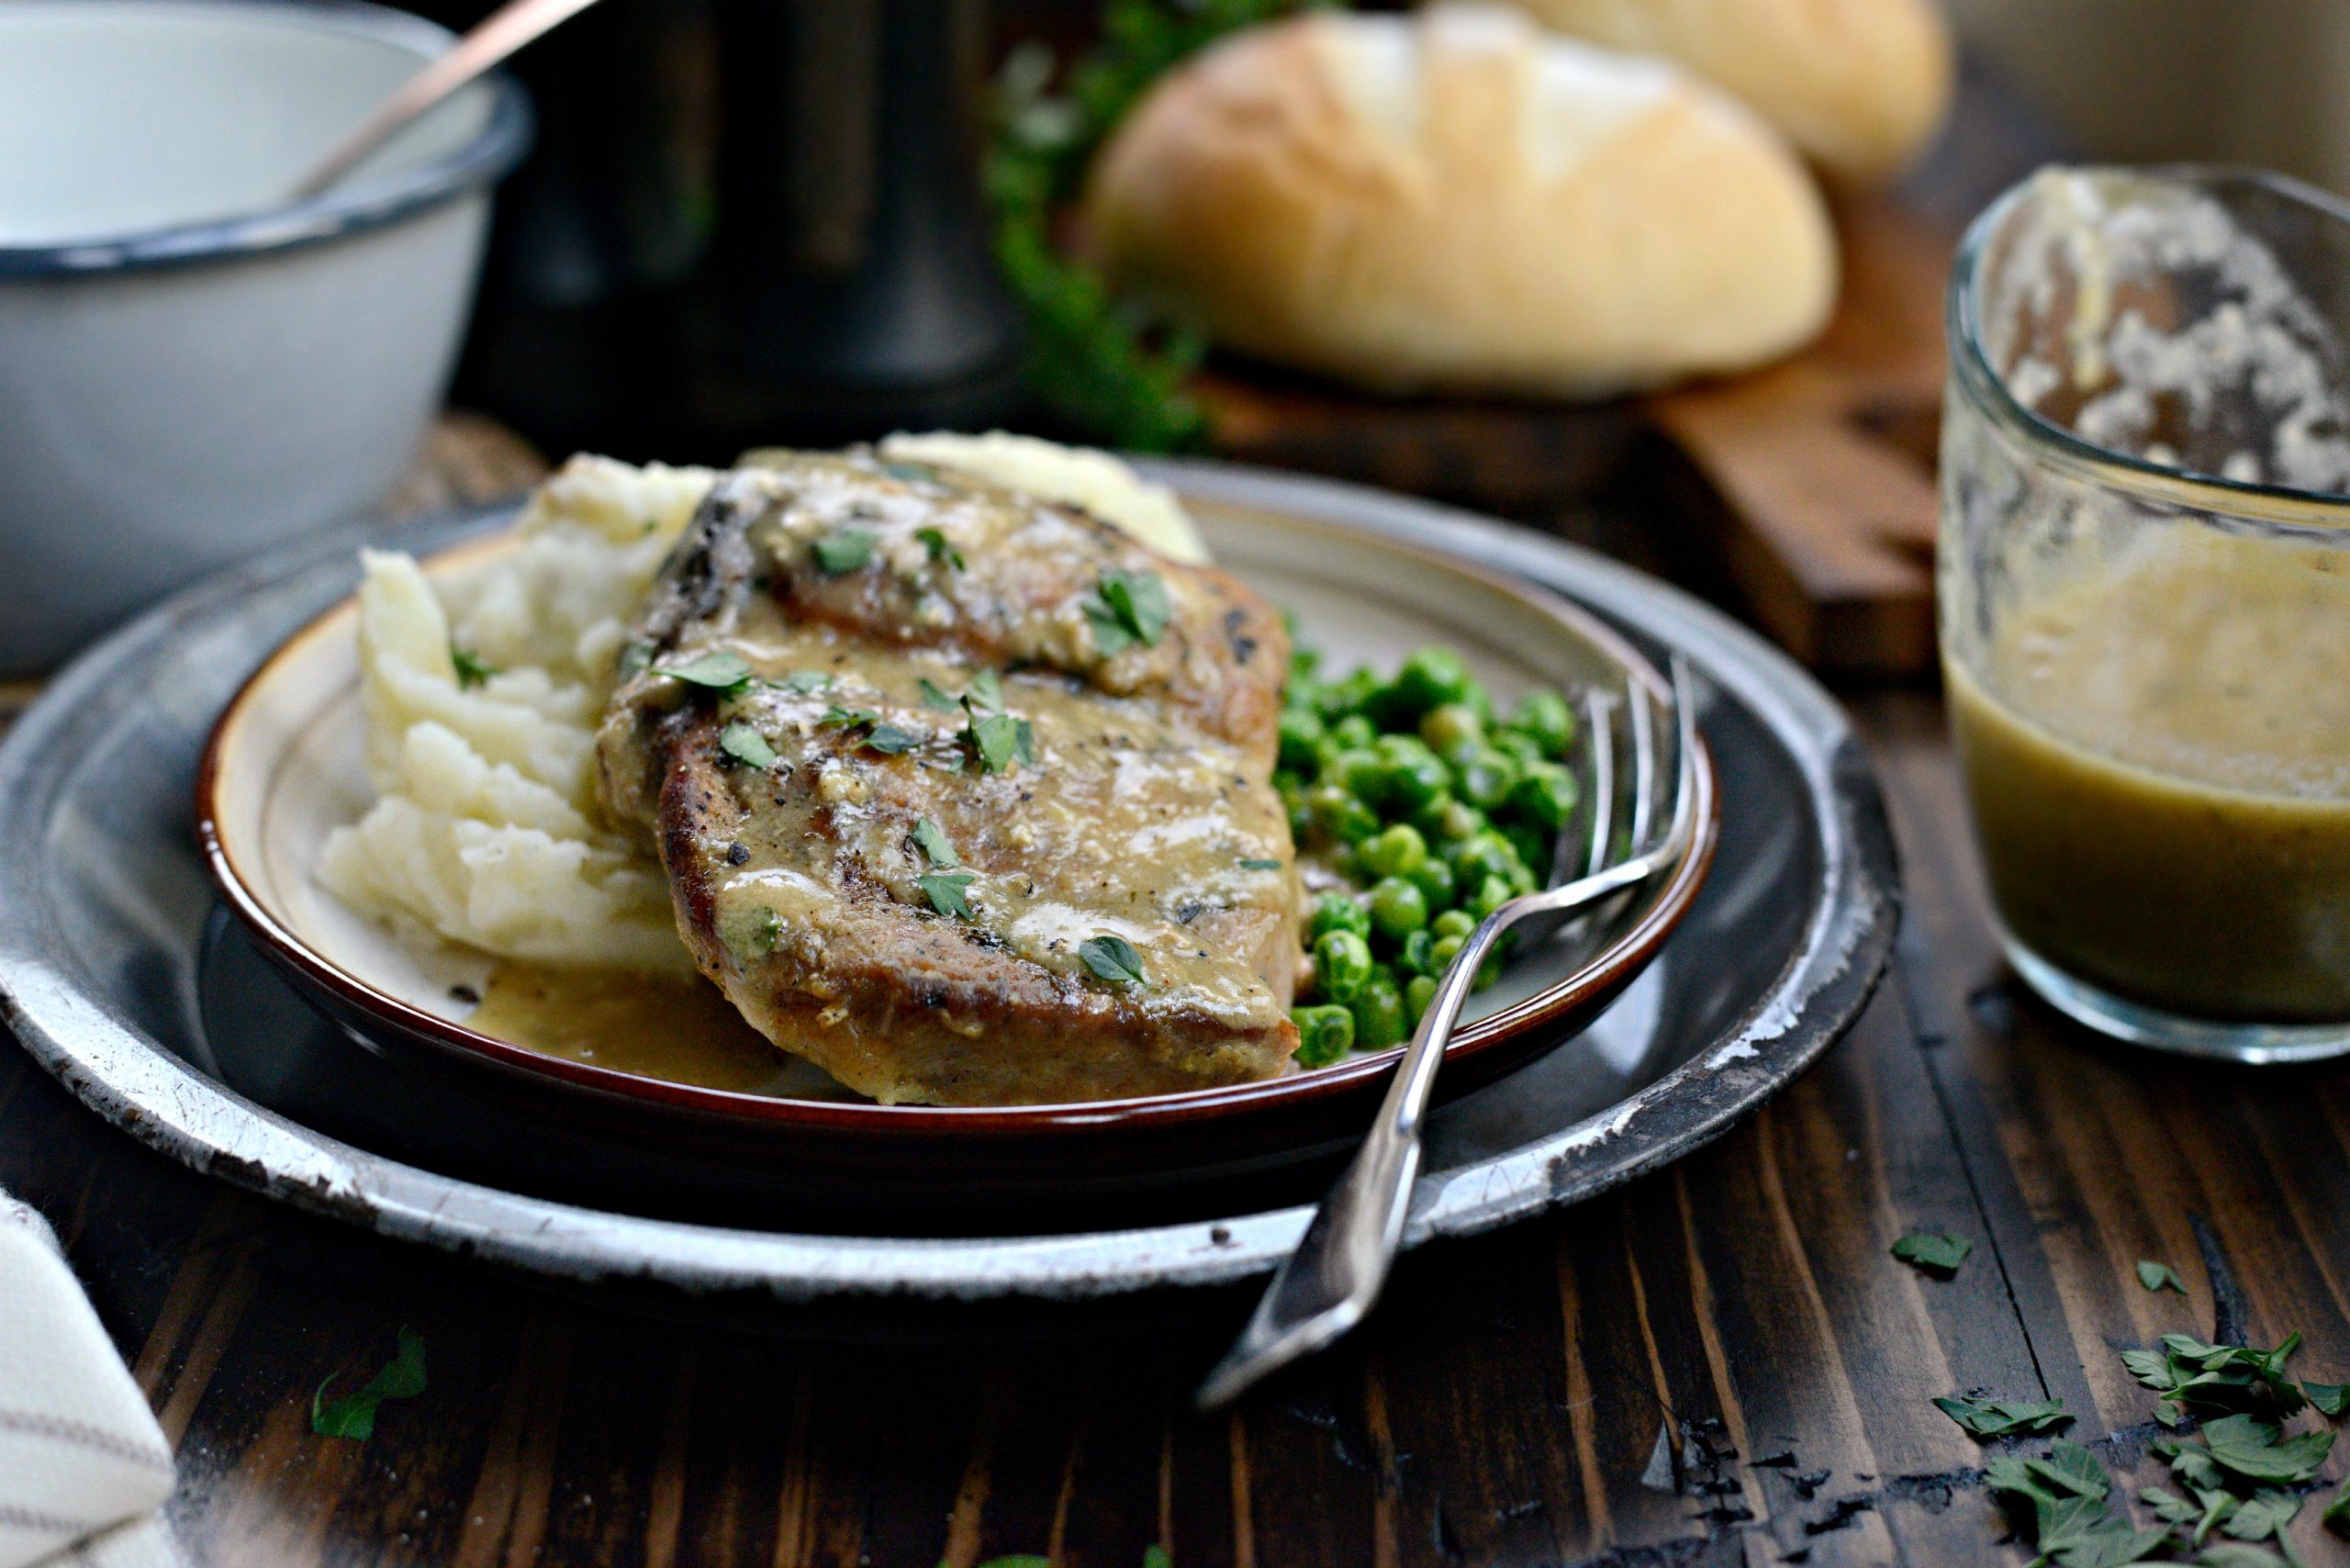 https://www.simplyscratch.com/wp-content/uploads/2016/10/Slow-Cooker-Pork-Chops-with-Herb-Gravy-l-SimplyScratch.com-18-scaled.jpg